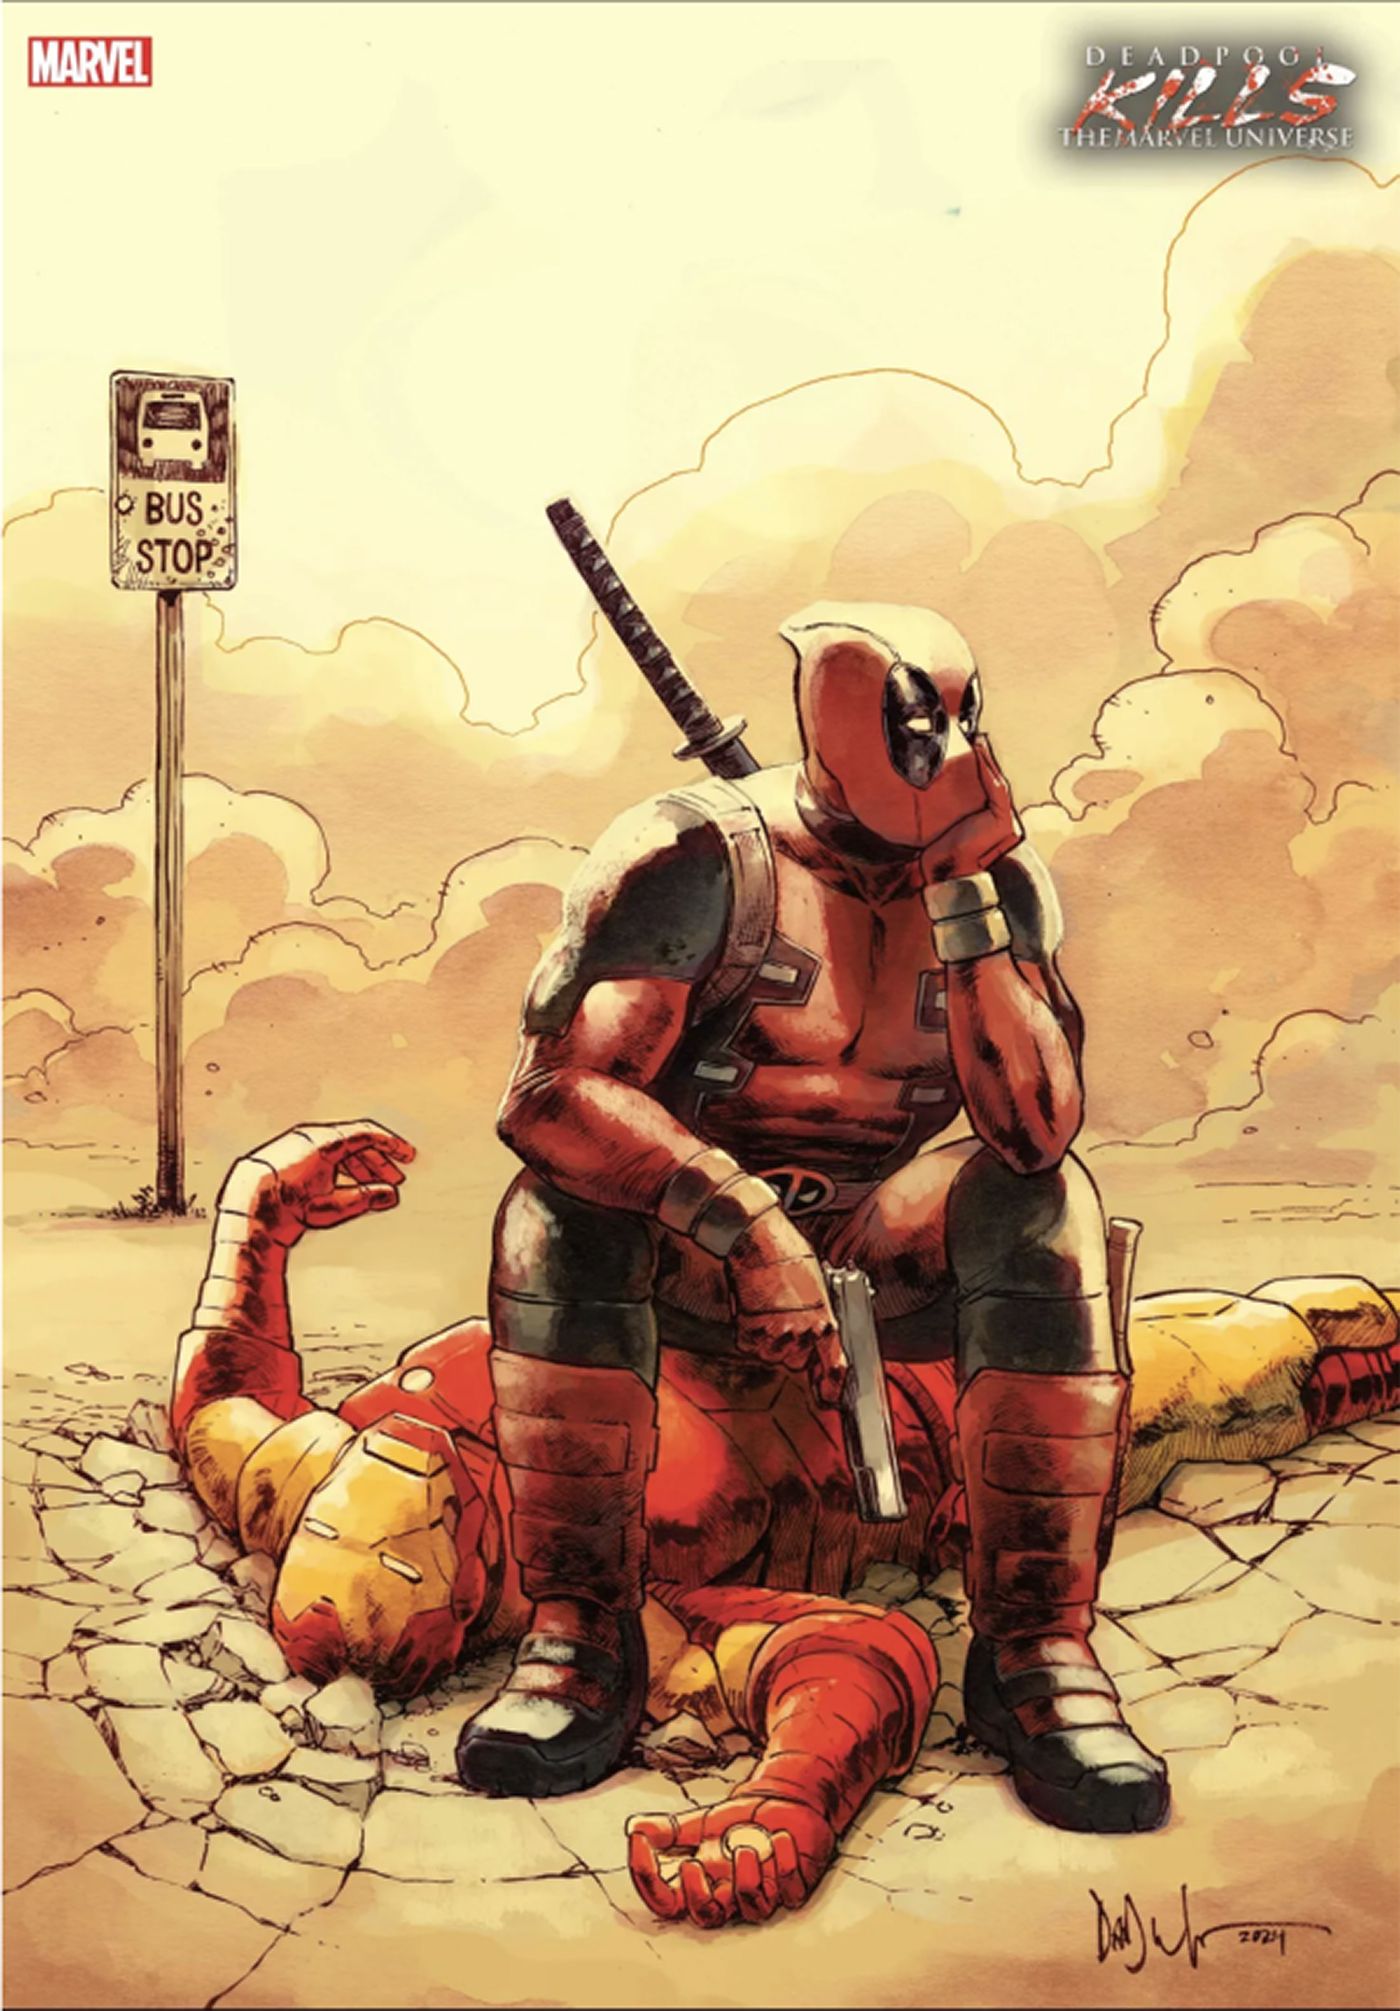 Deadpool sits on top of the corpse of Iron Man, gun in hand, waiting for a bus.